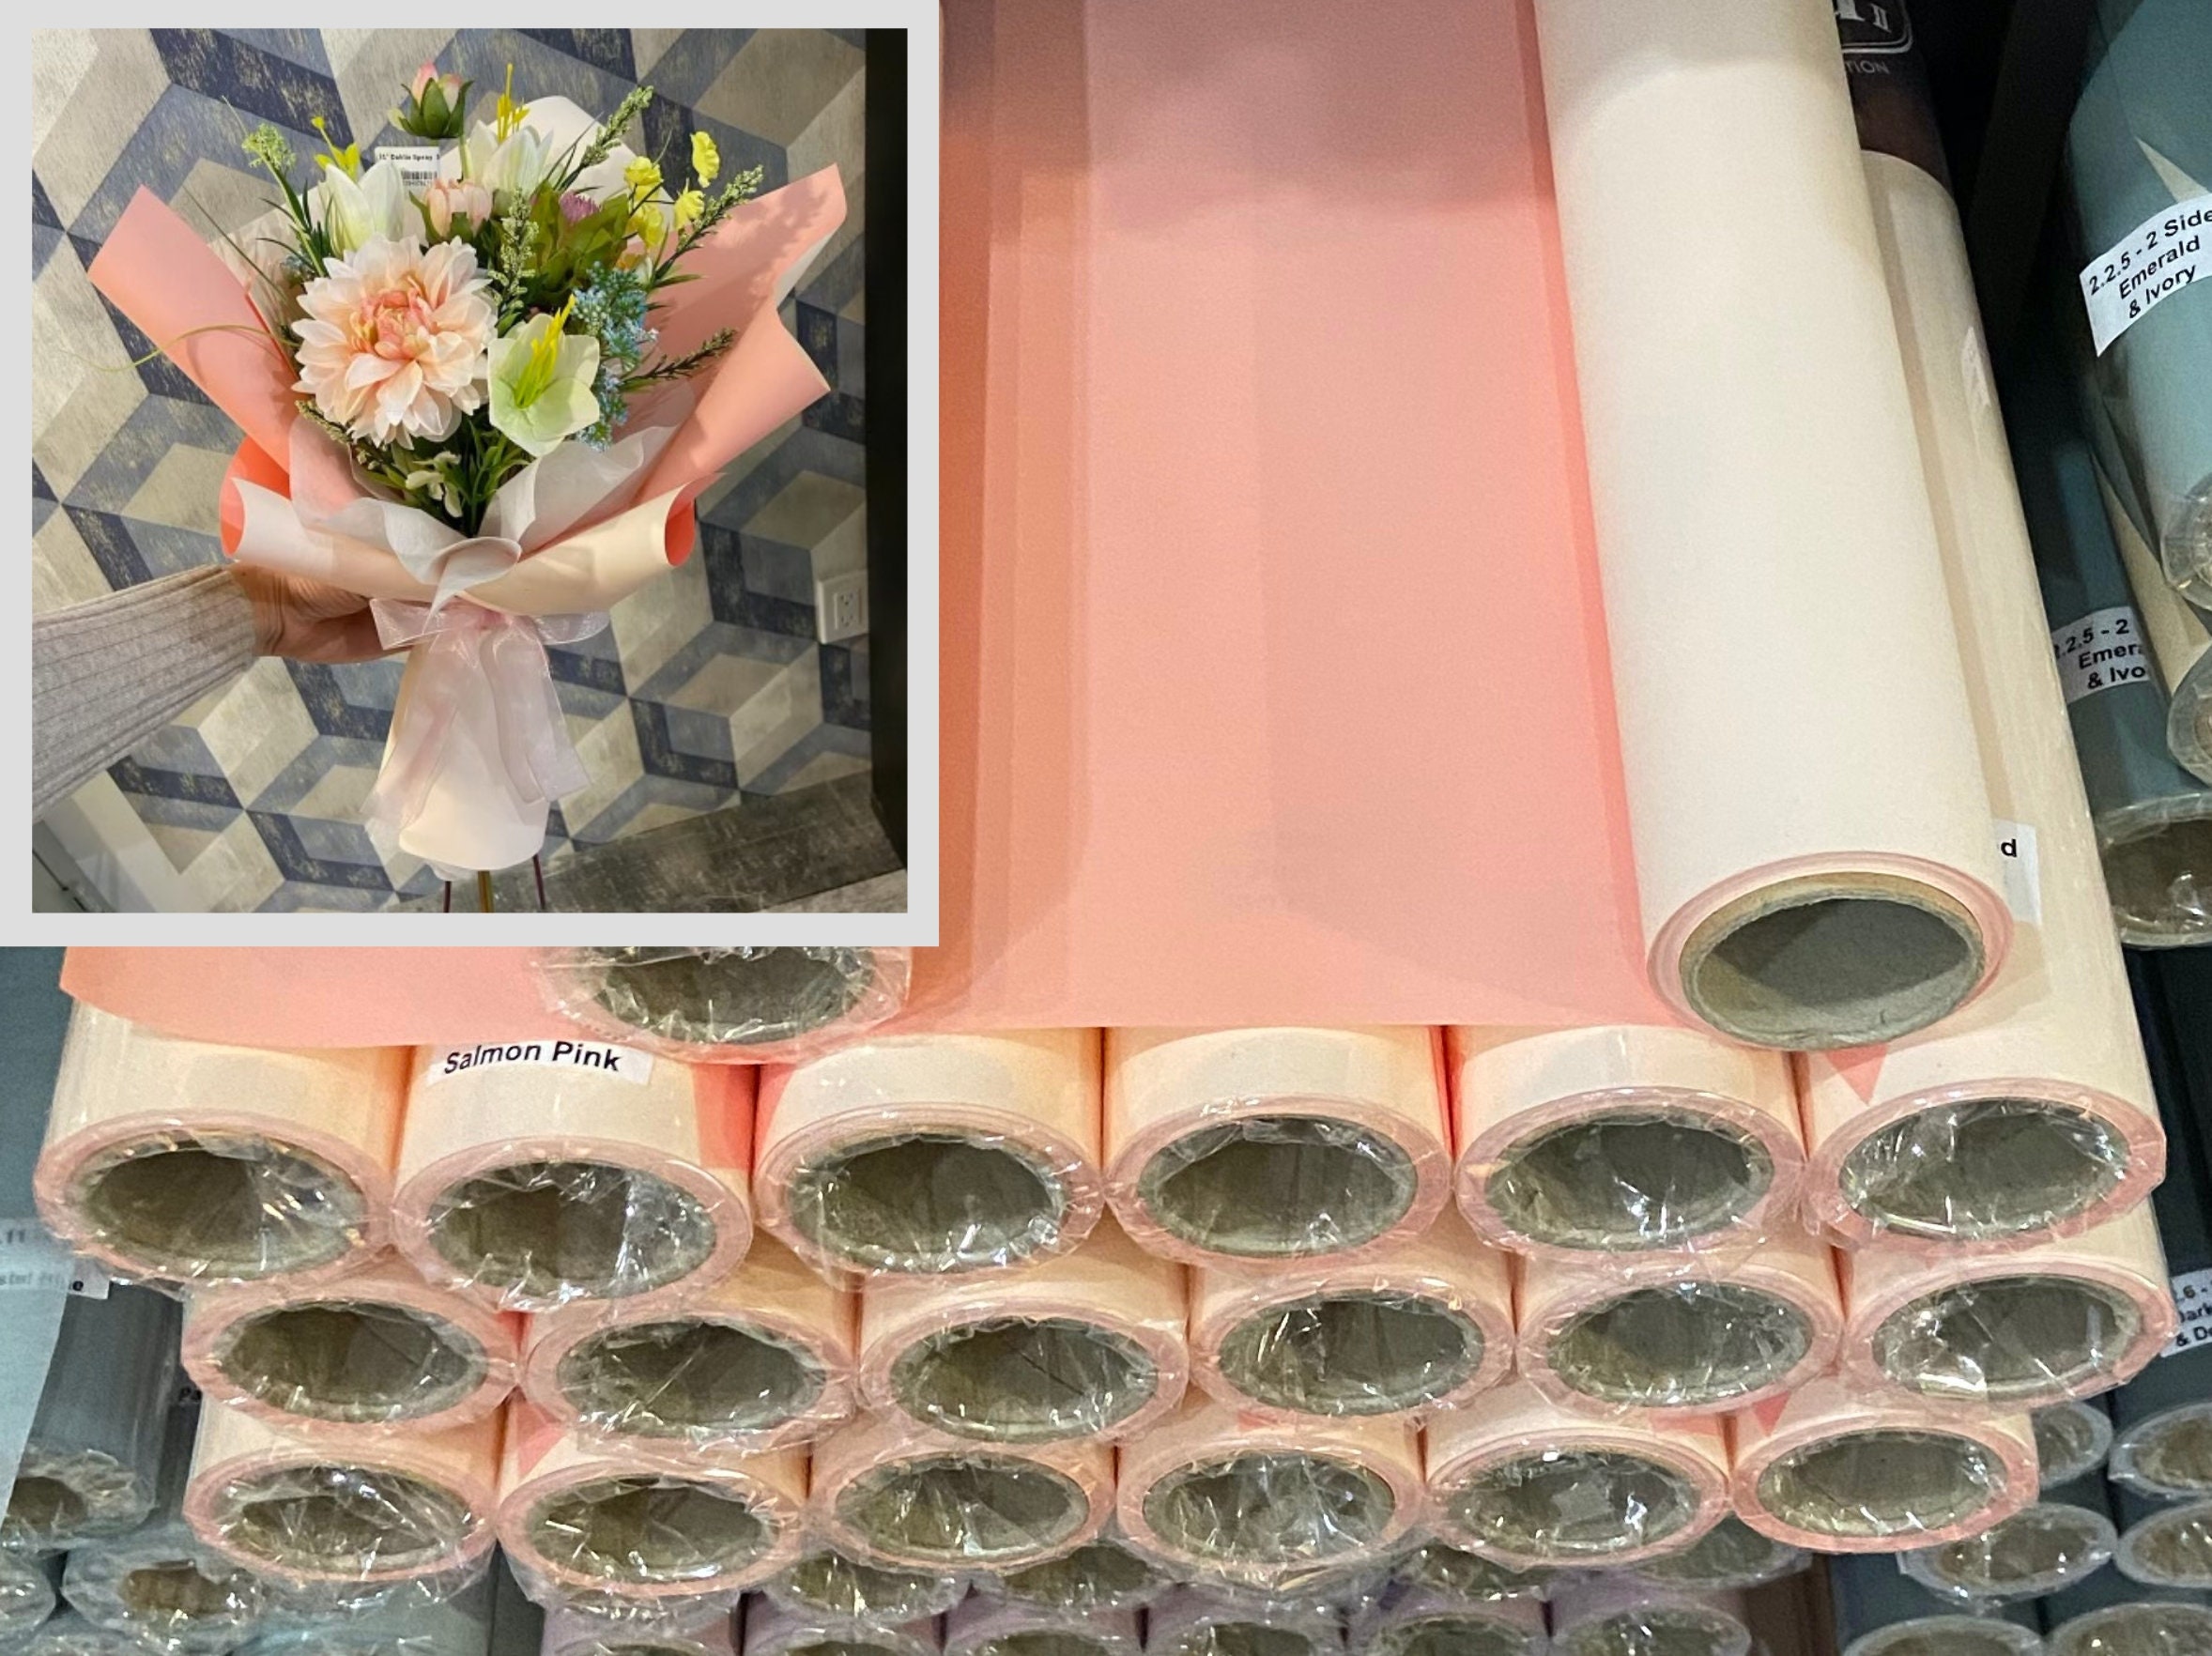 Korean Style Wrapping Paper Waterproof Thick for Flower Bouquets and Gifts  15 Yards 